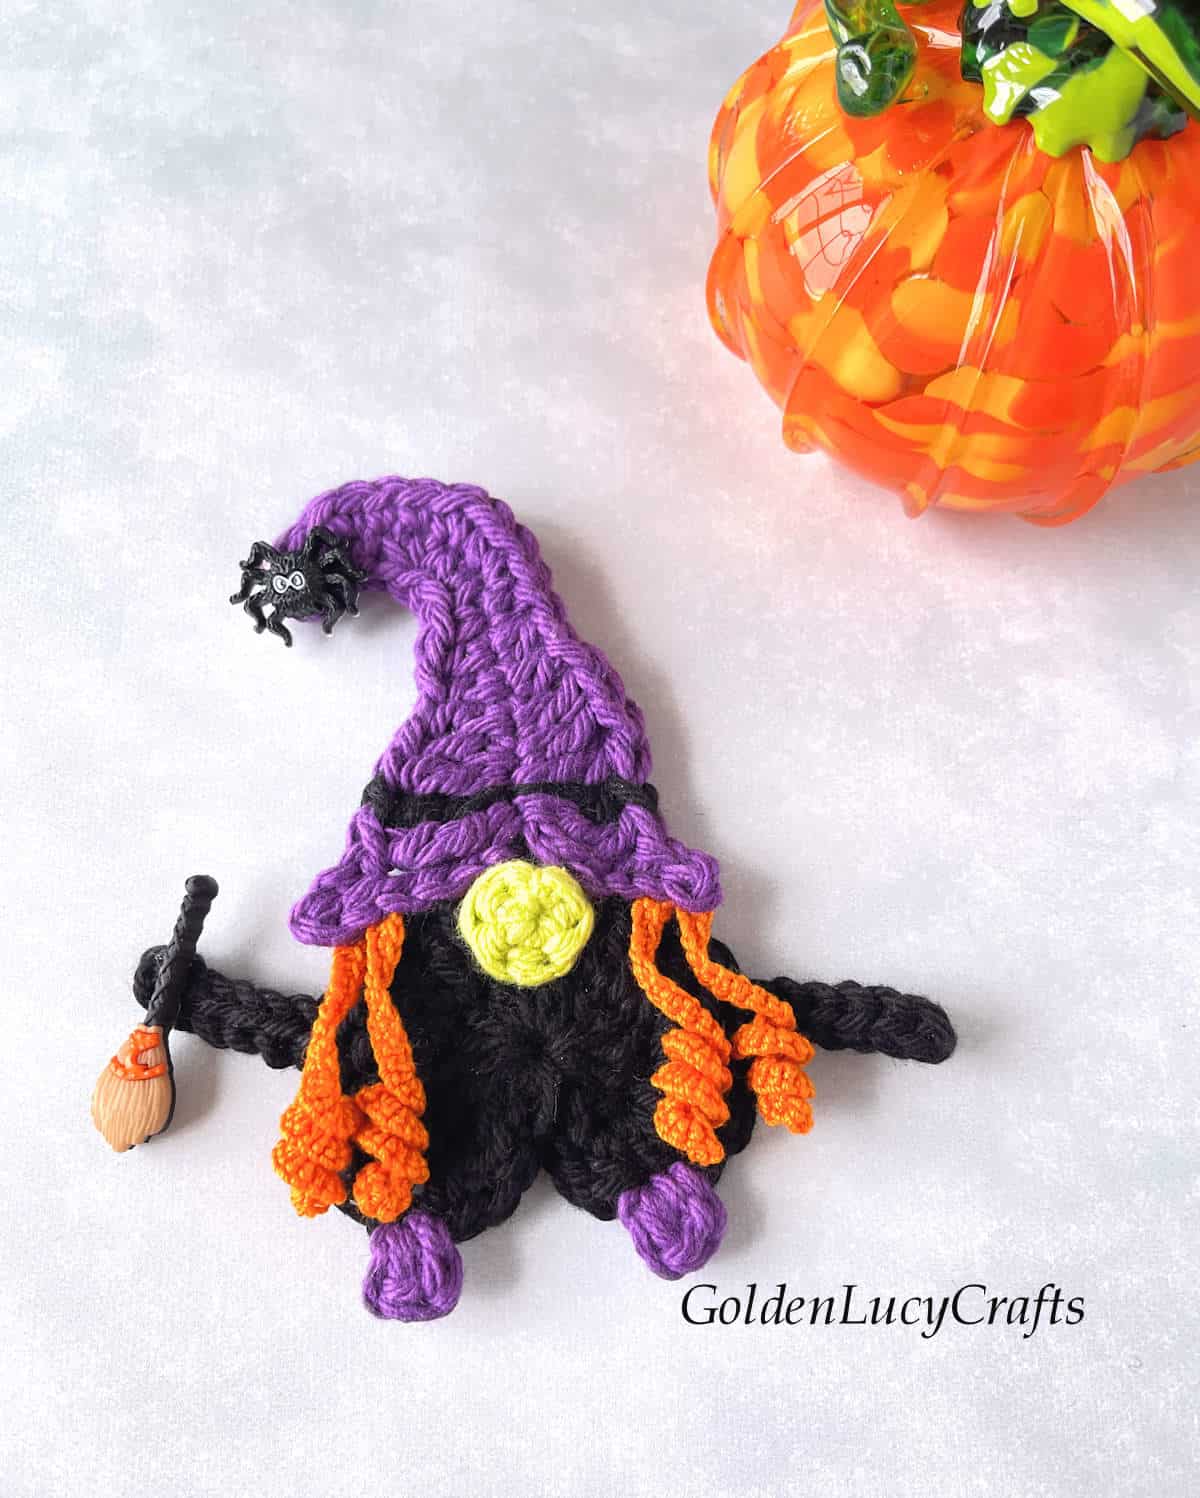 Crochet applique witch with broom.